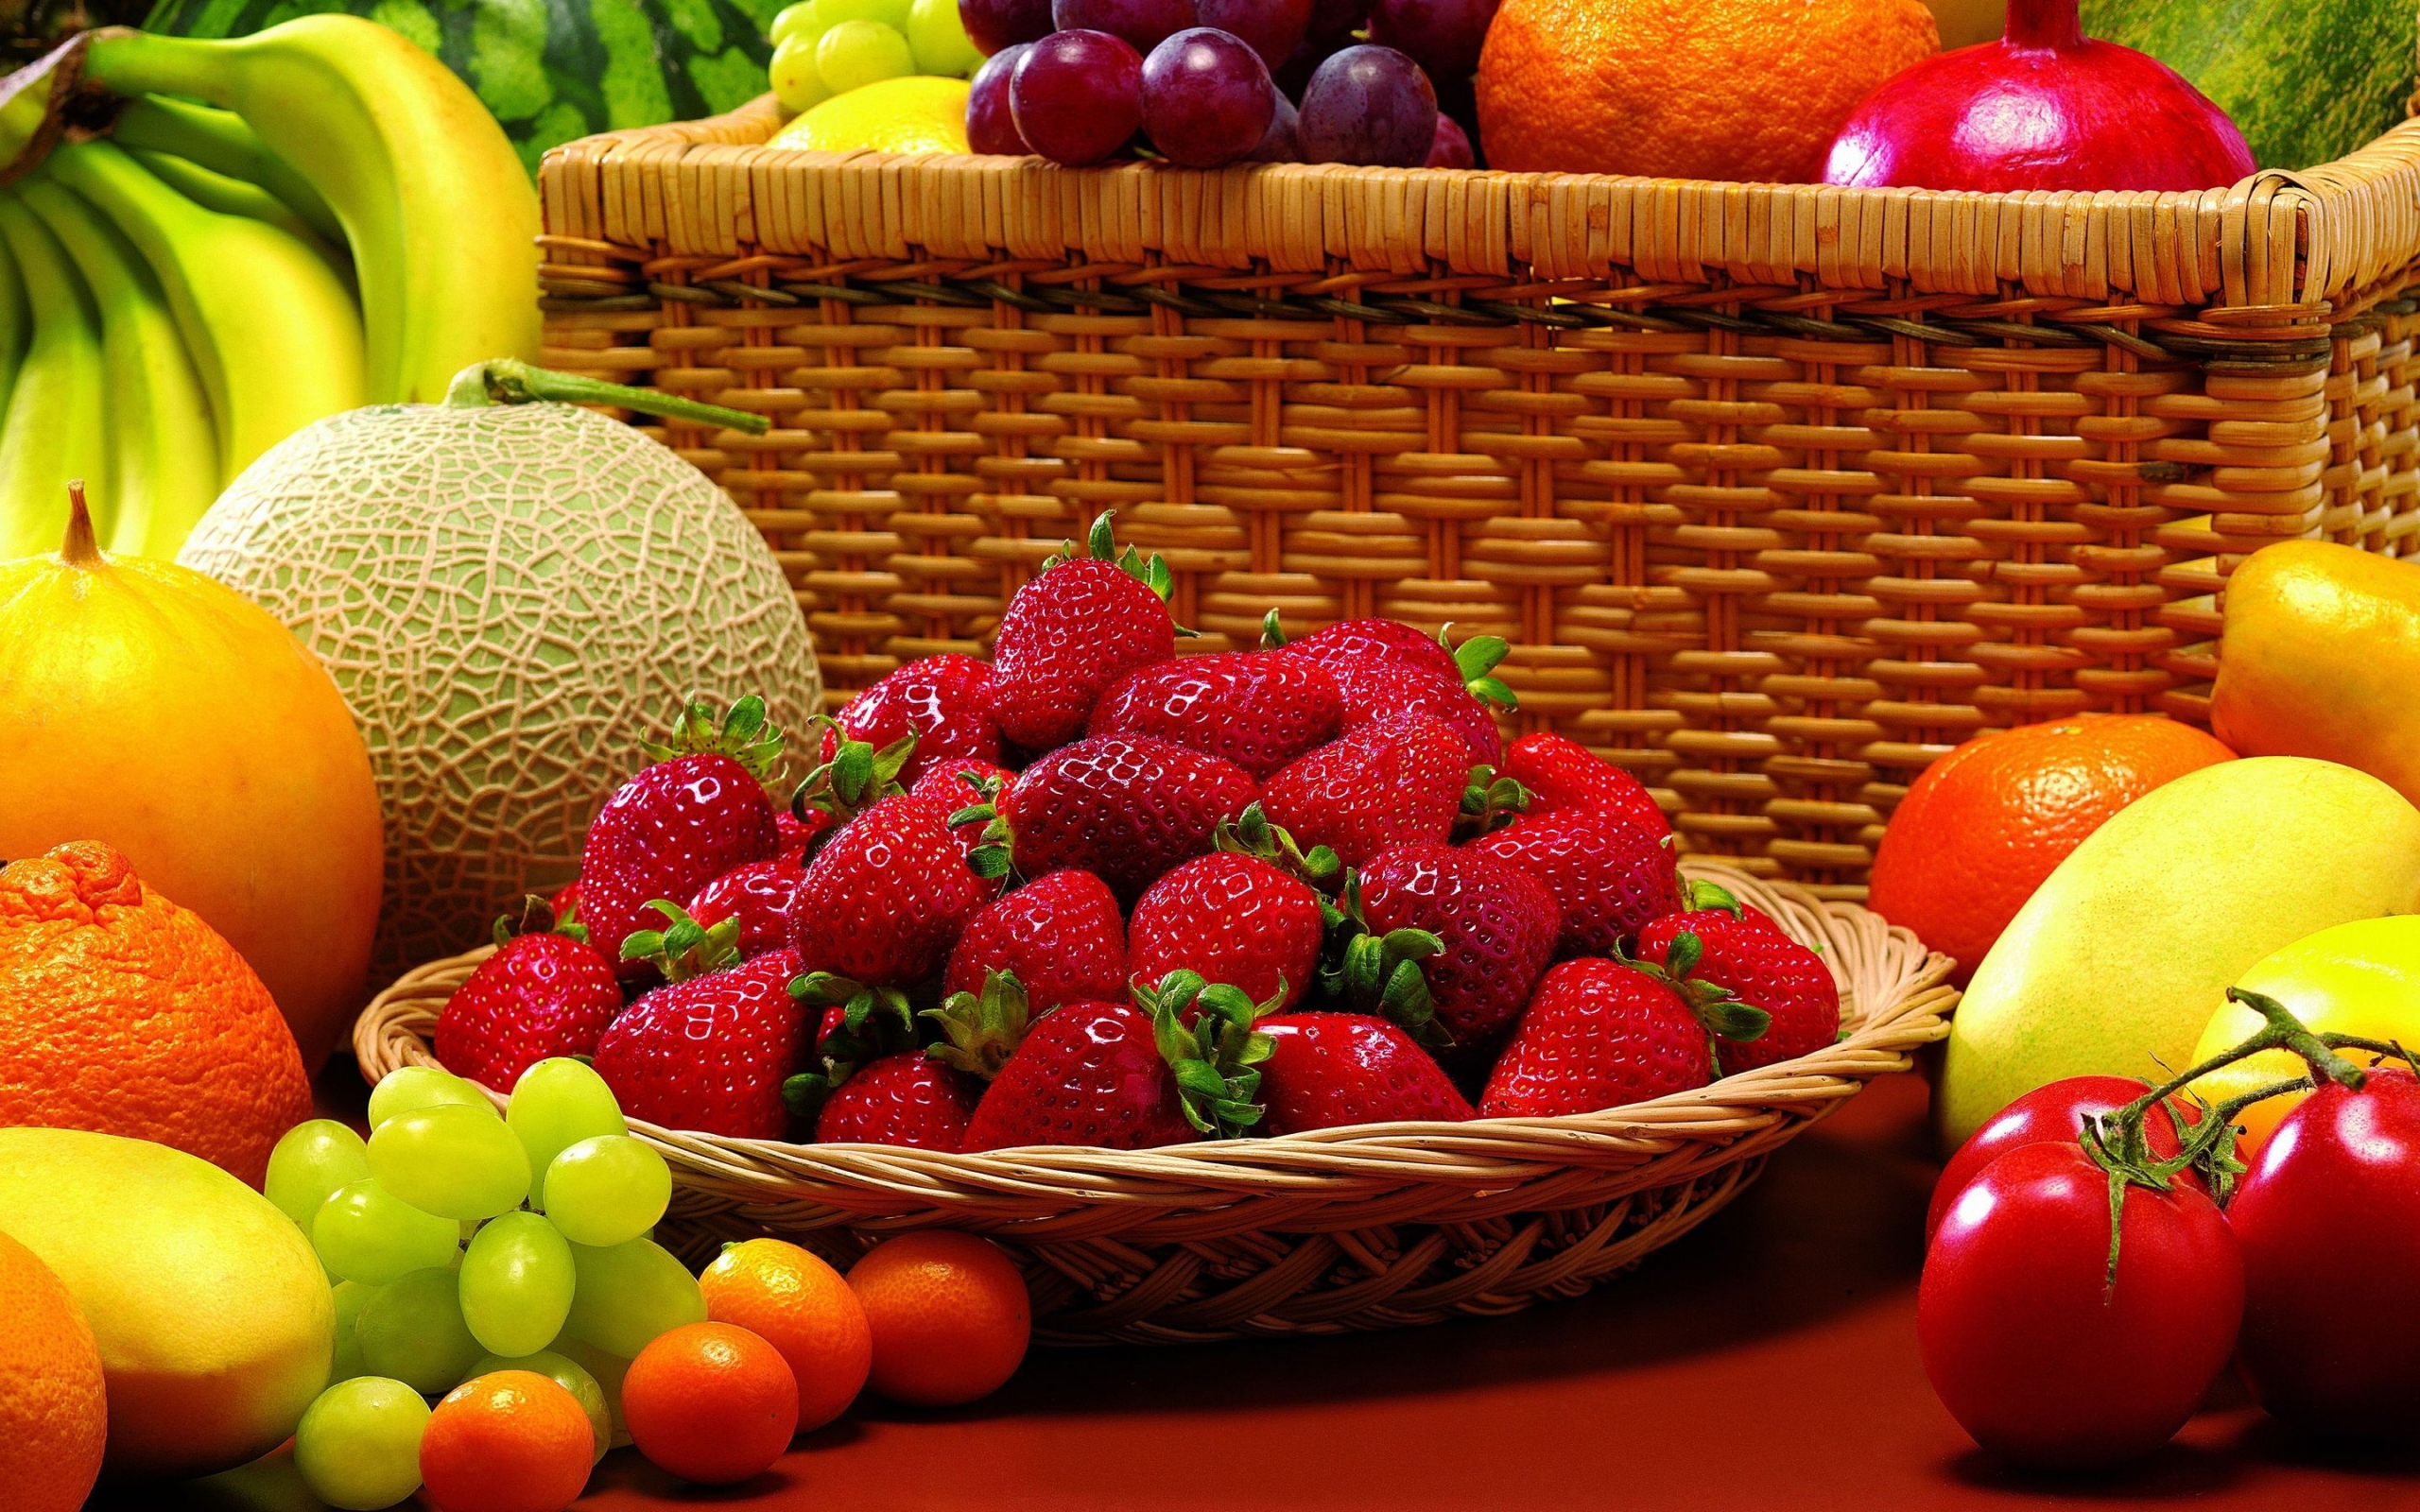 Amazing Fruits for 2560 x 1600 widescreen resolution